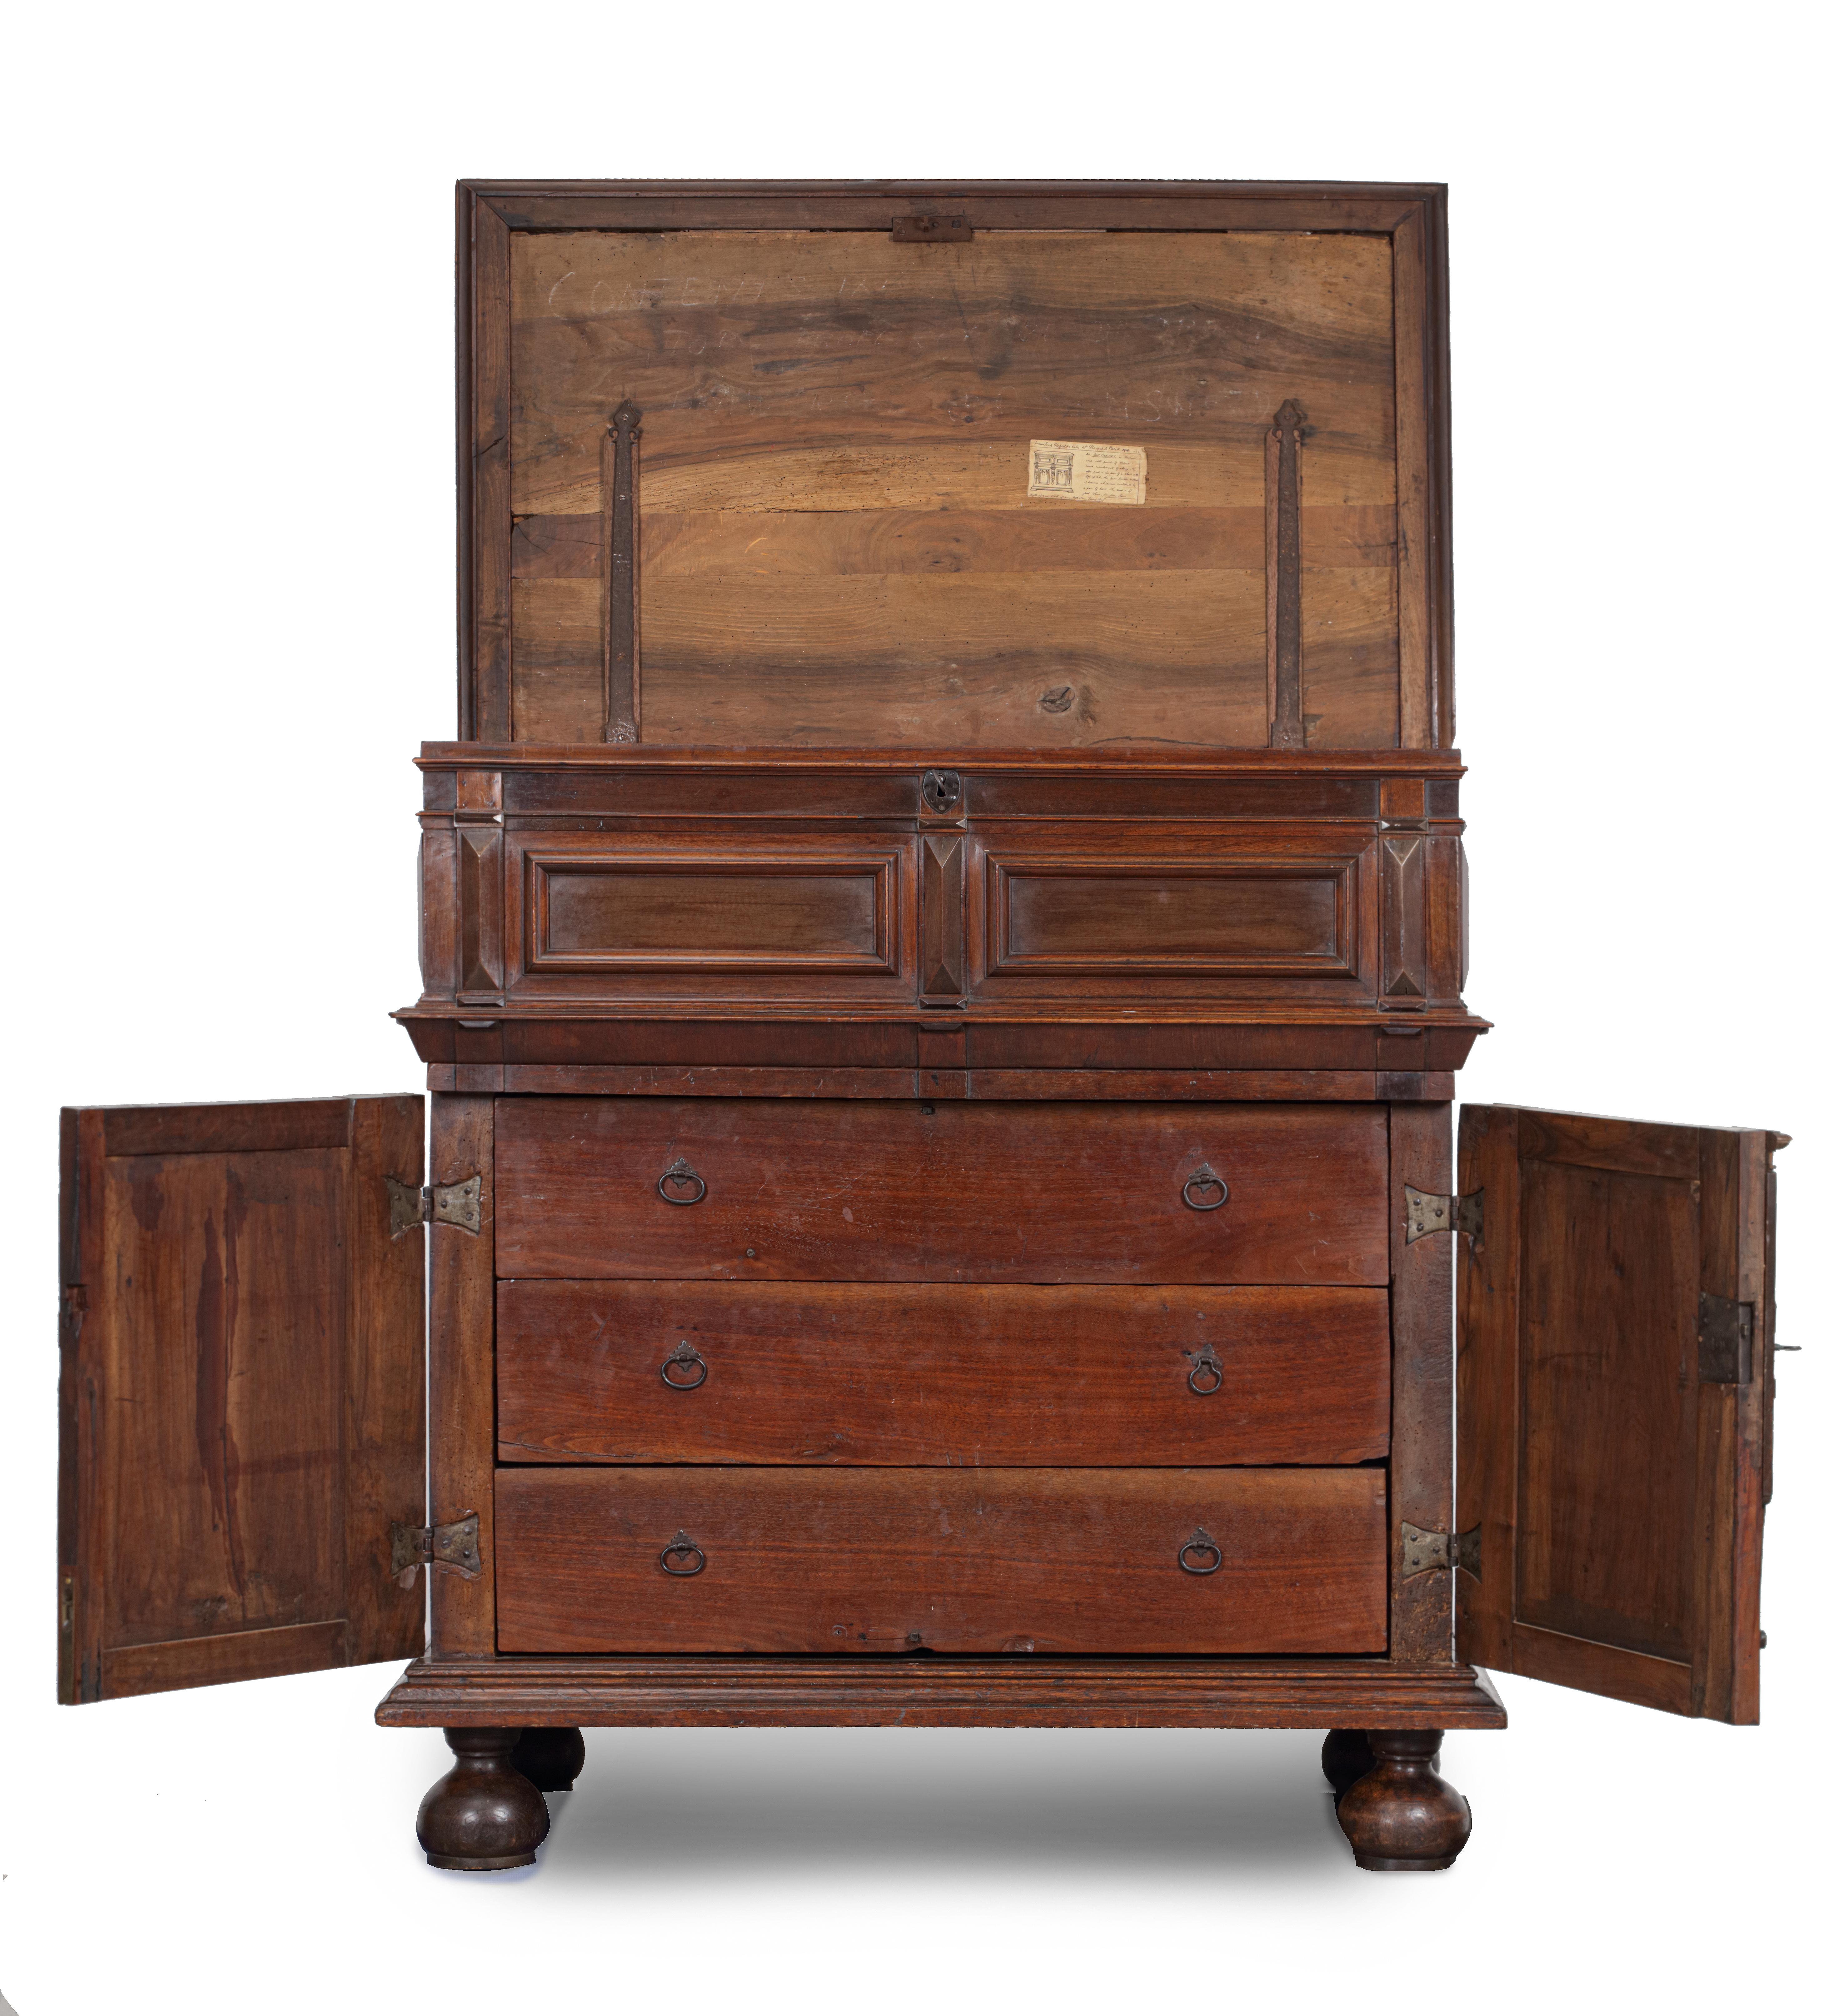 A joined enclosed American walnut, white oak, pine, beech, maple, krappa (crabwood), and letterwood Boston chest of drawers with lidded top

Ipswich/Boston, Massachusetts, 1650-1670

The wood and wood of the base has been DNA tested and complies